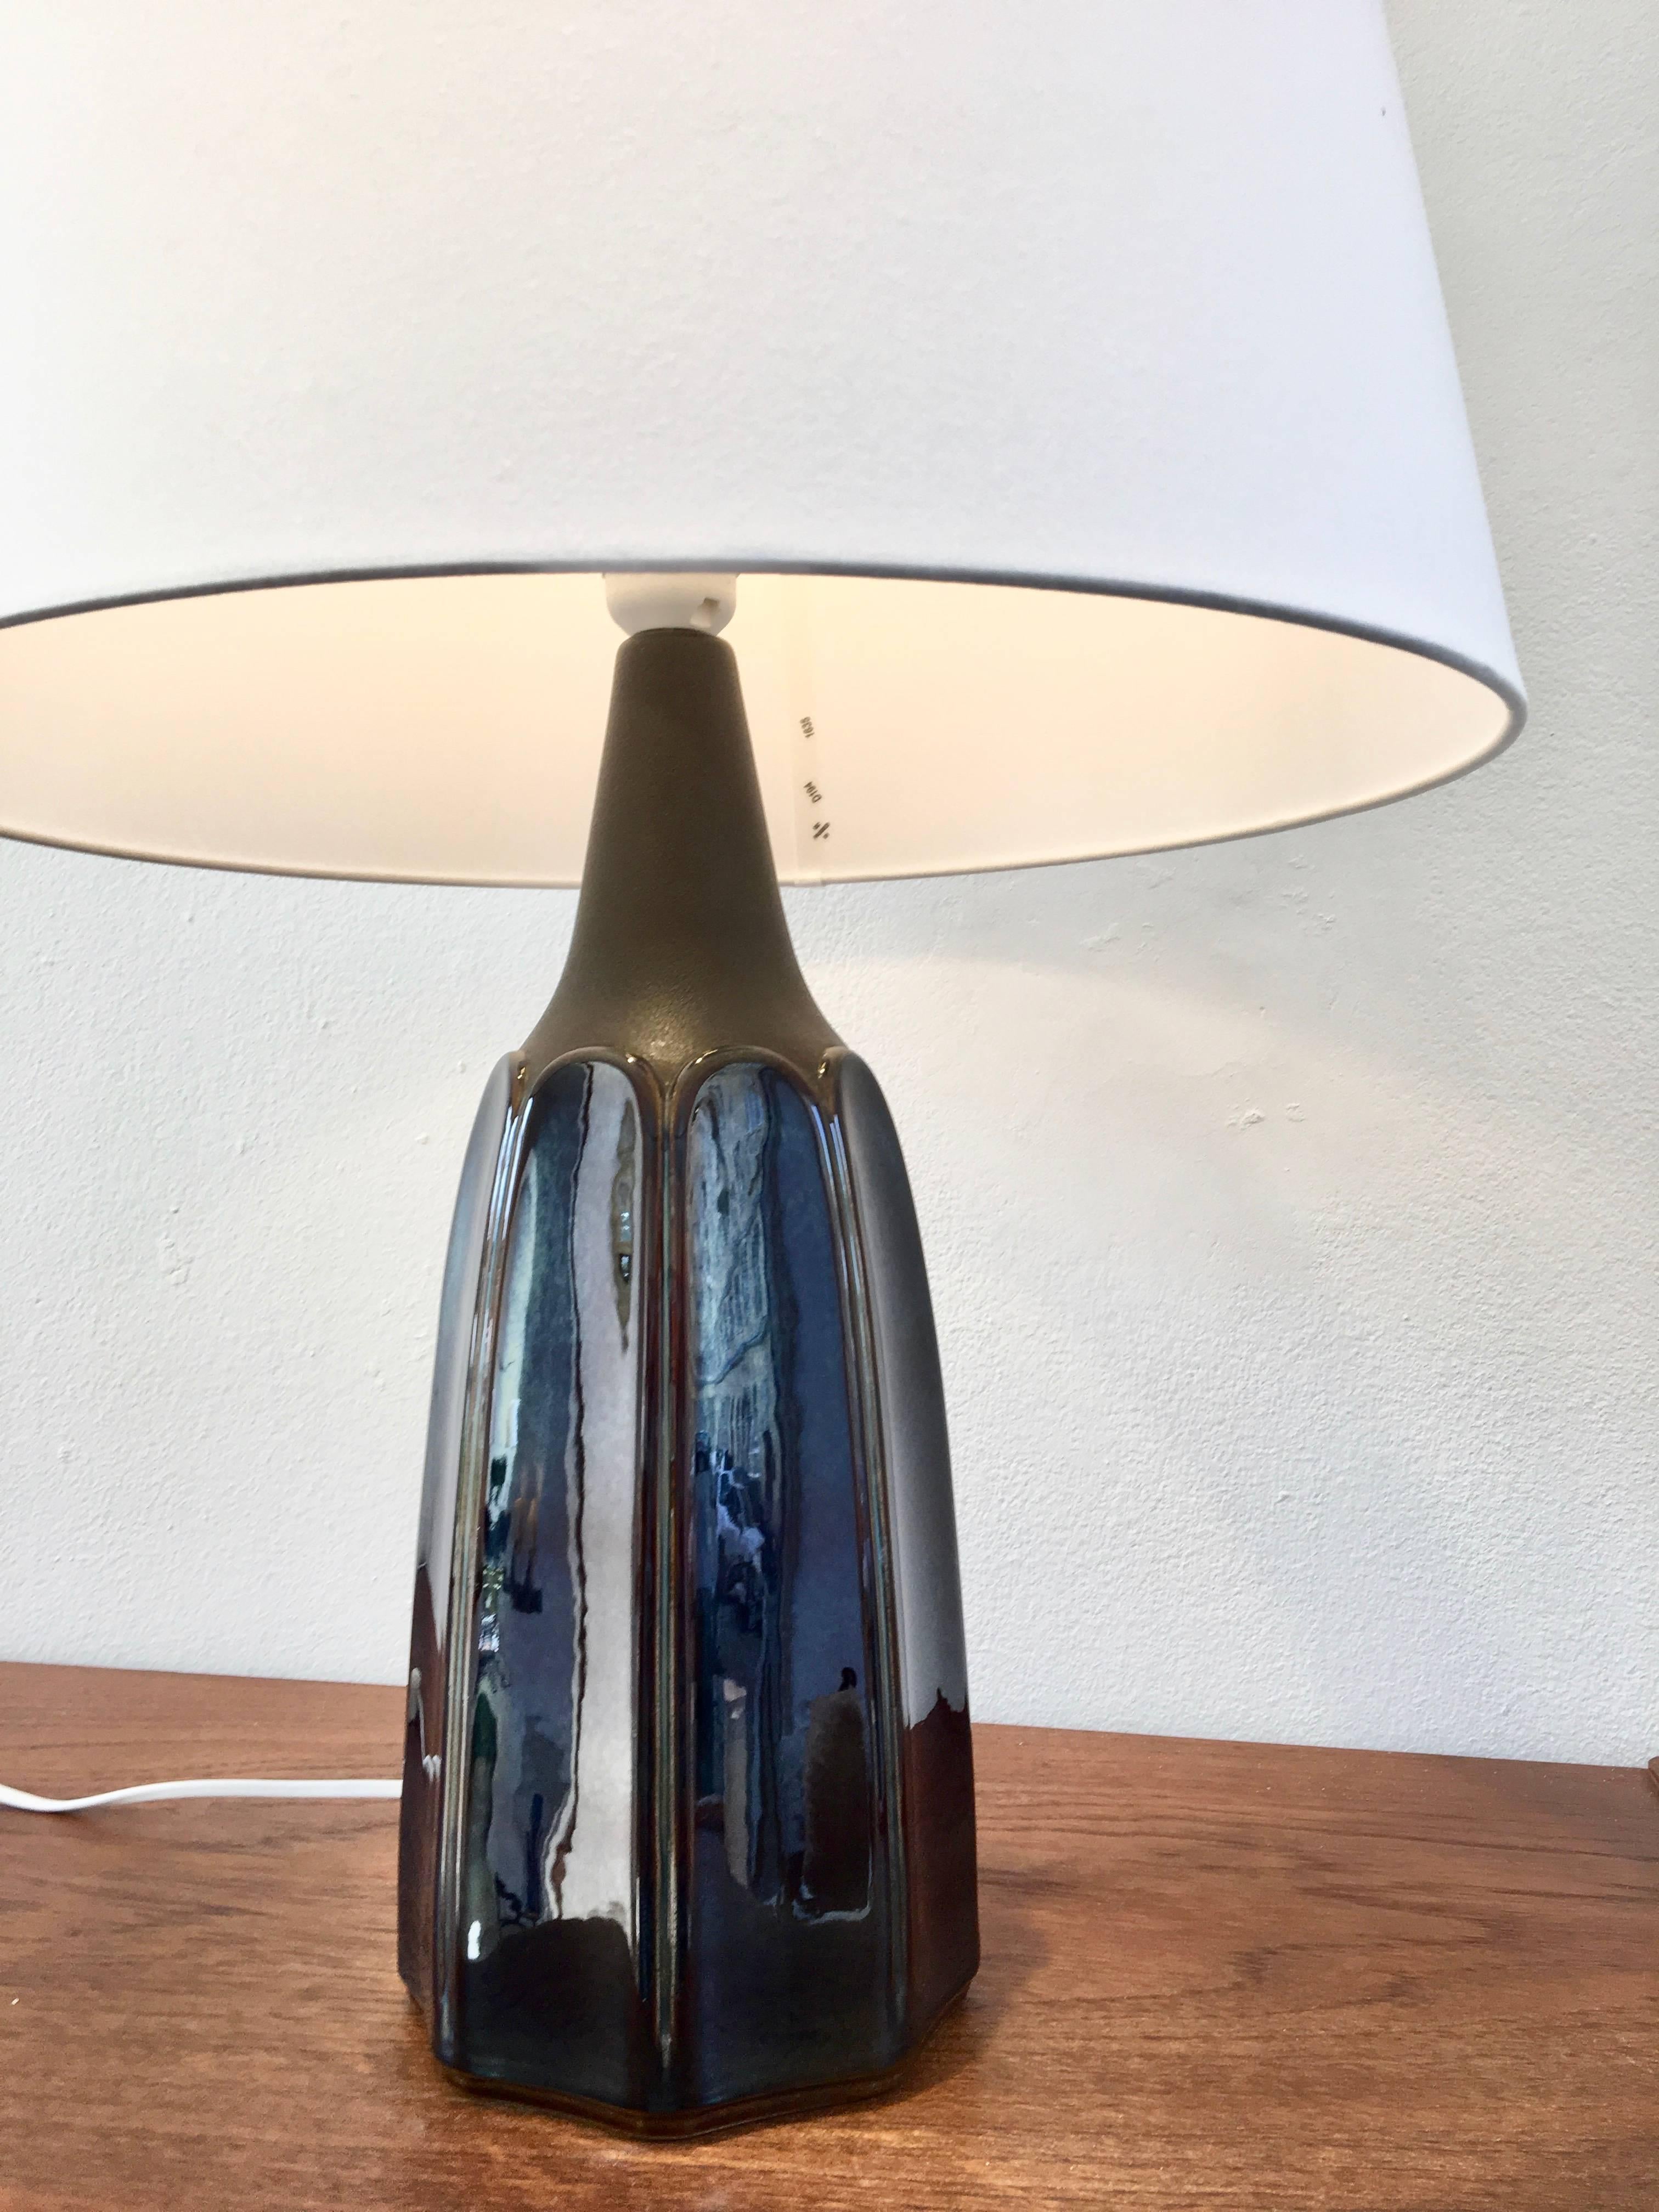 This table lamp was designed by Einar Johansen and produced by Danish company Soholm Stentoj in the 1960s.
It is made of stoneware and features a ceramic glaze. The lamp has been rewired for European standards and has a new shade.